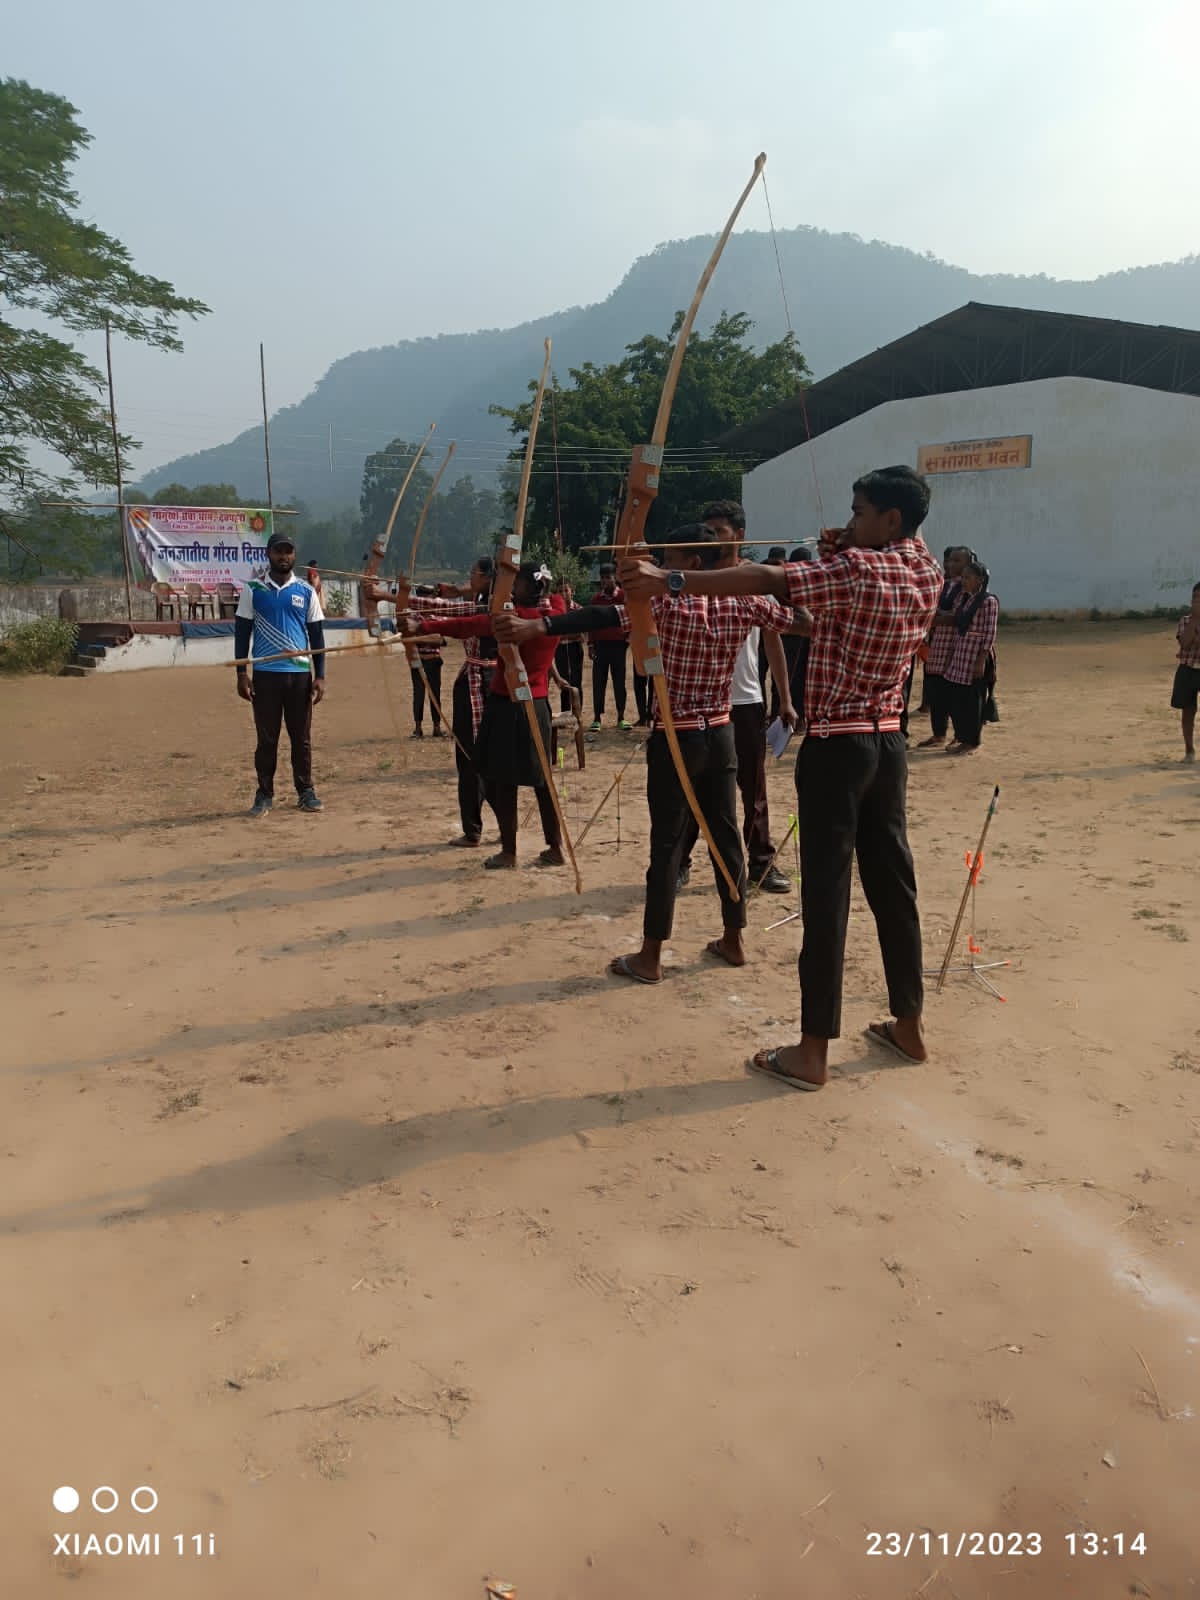 Archery Competition